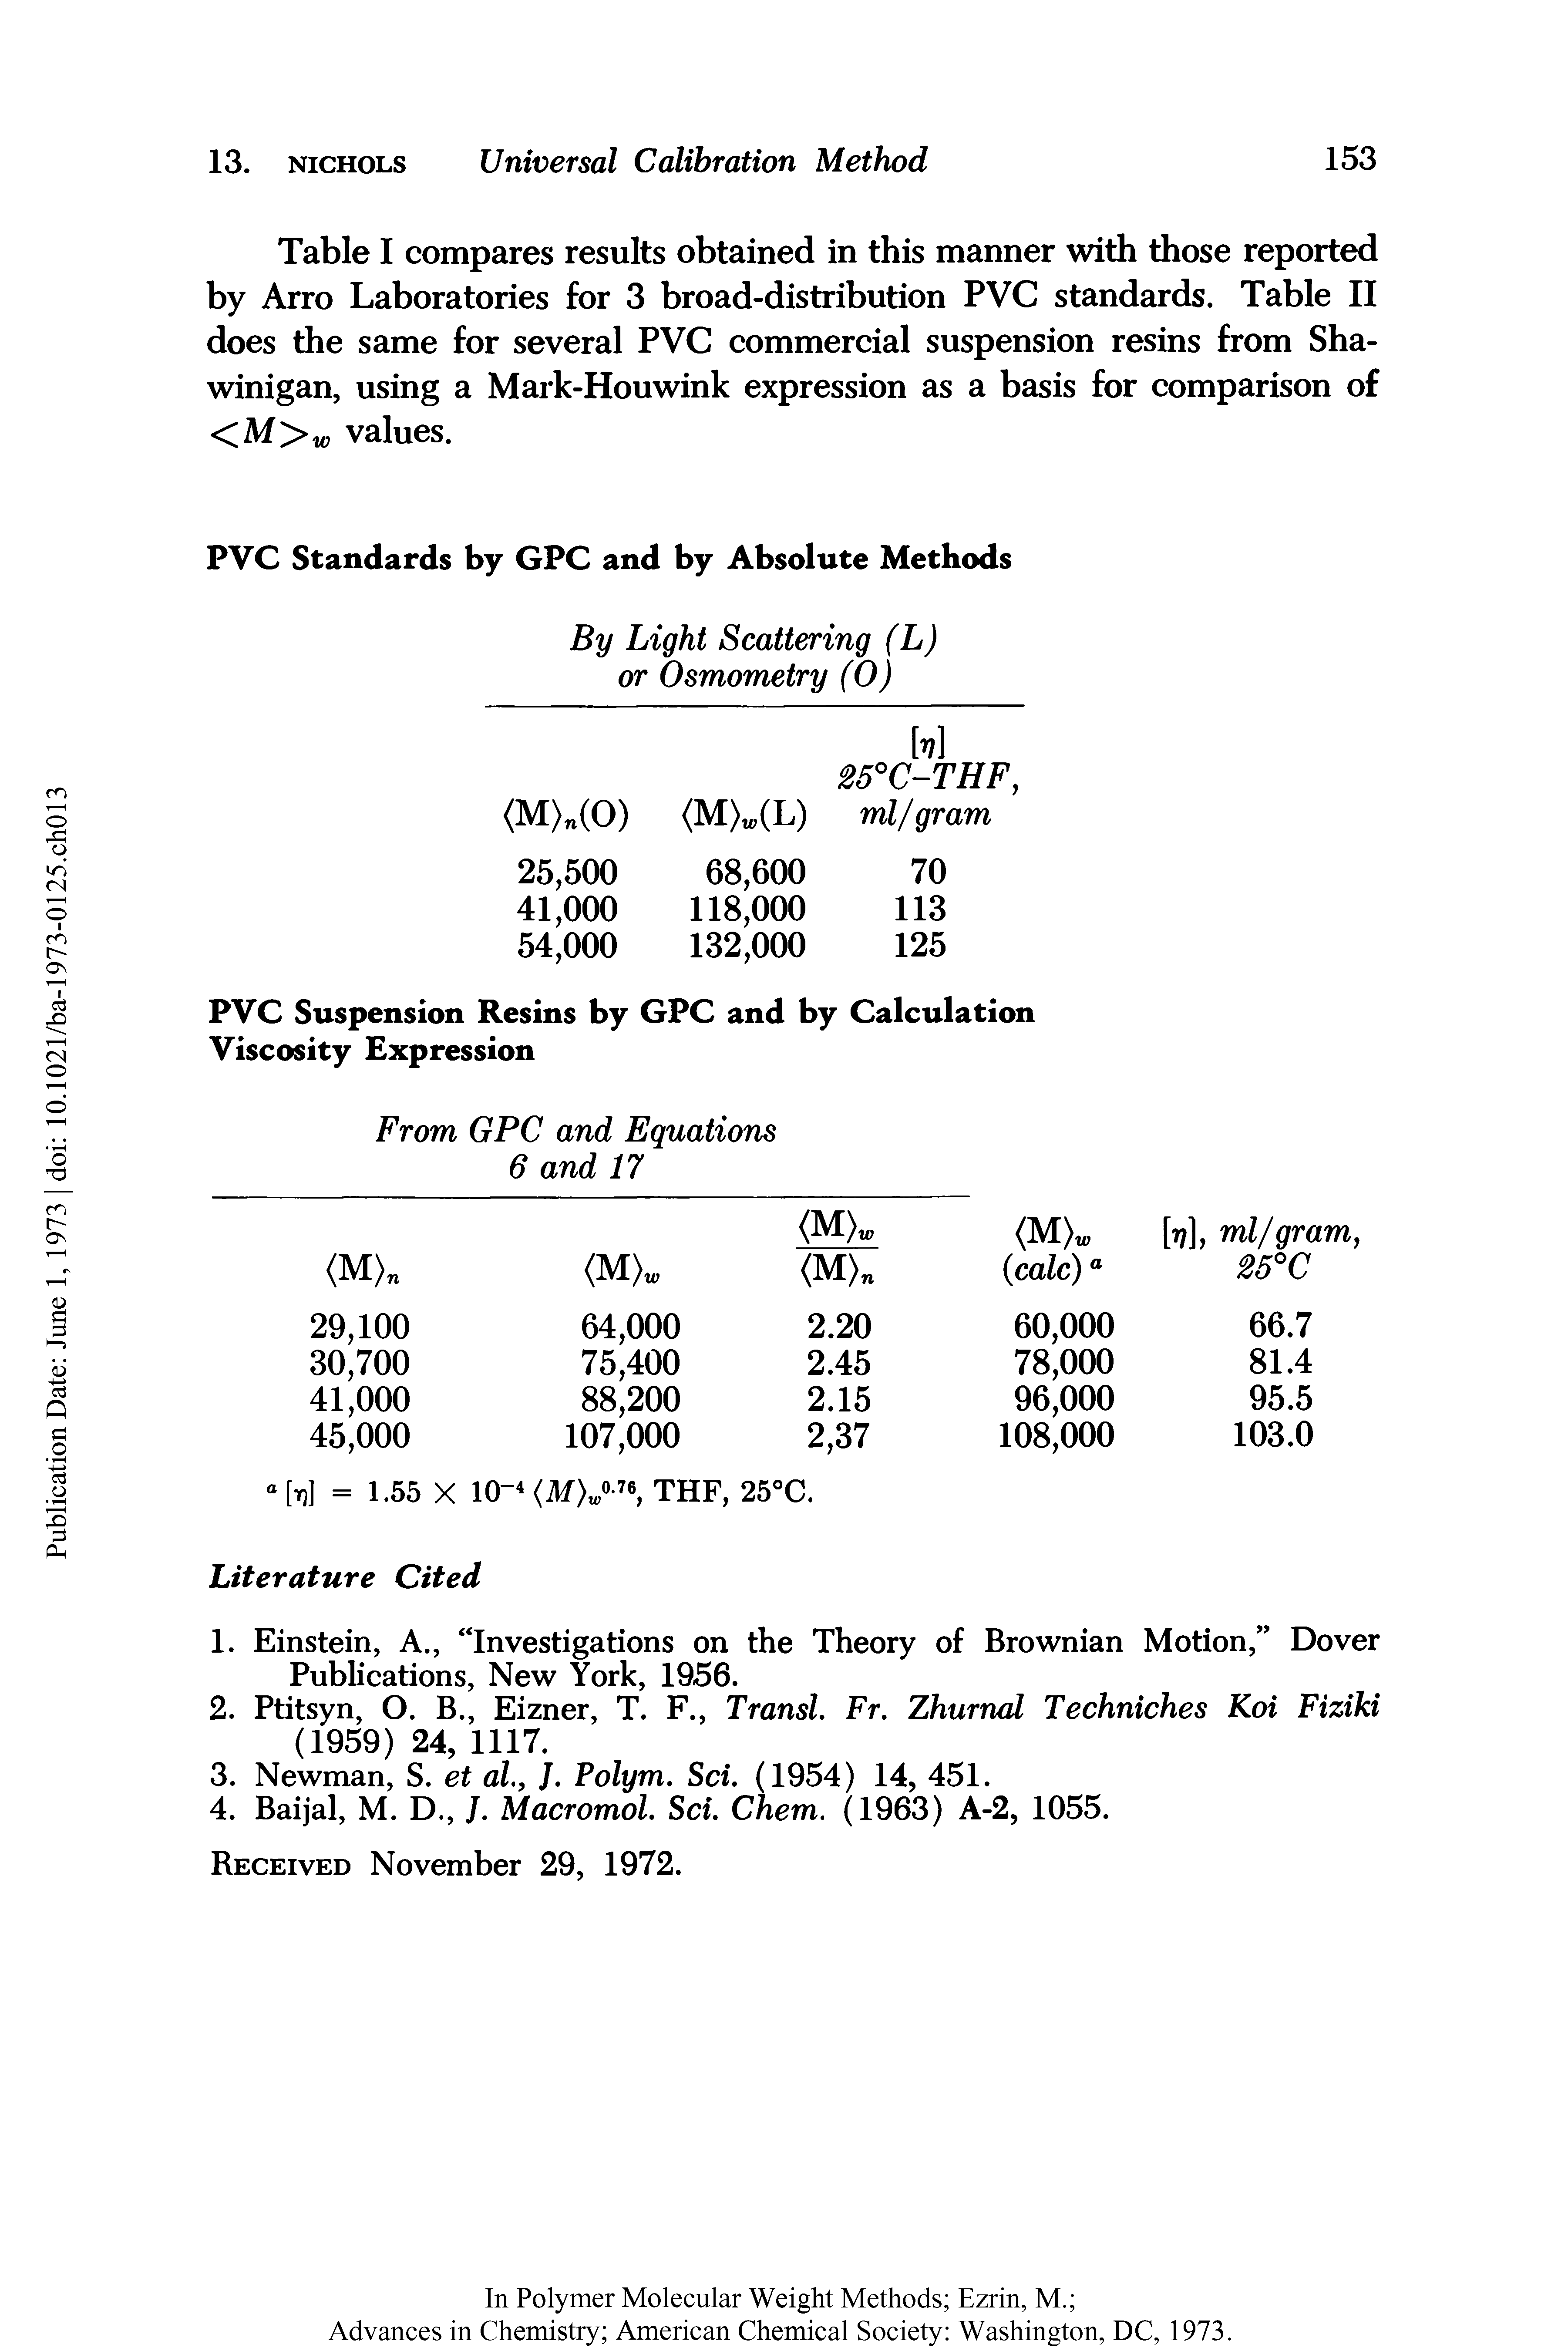 Table I compares results obtained in this manner with those reported by Arro Laboratories for 3 broad-distribution PVC standards. Table II does the same for several PVC commercial suspension resins from Sha-winigan, using a Mark-Houwink expression as a basis for comparison of <M>W values.